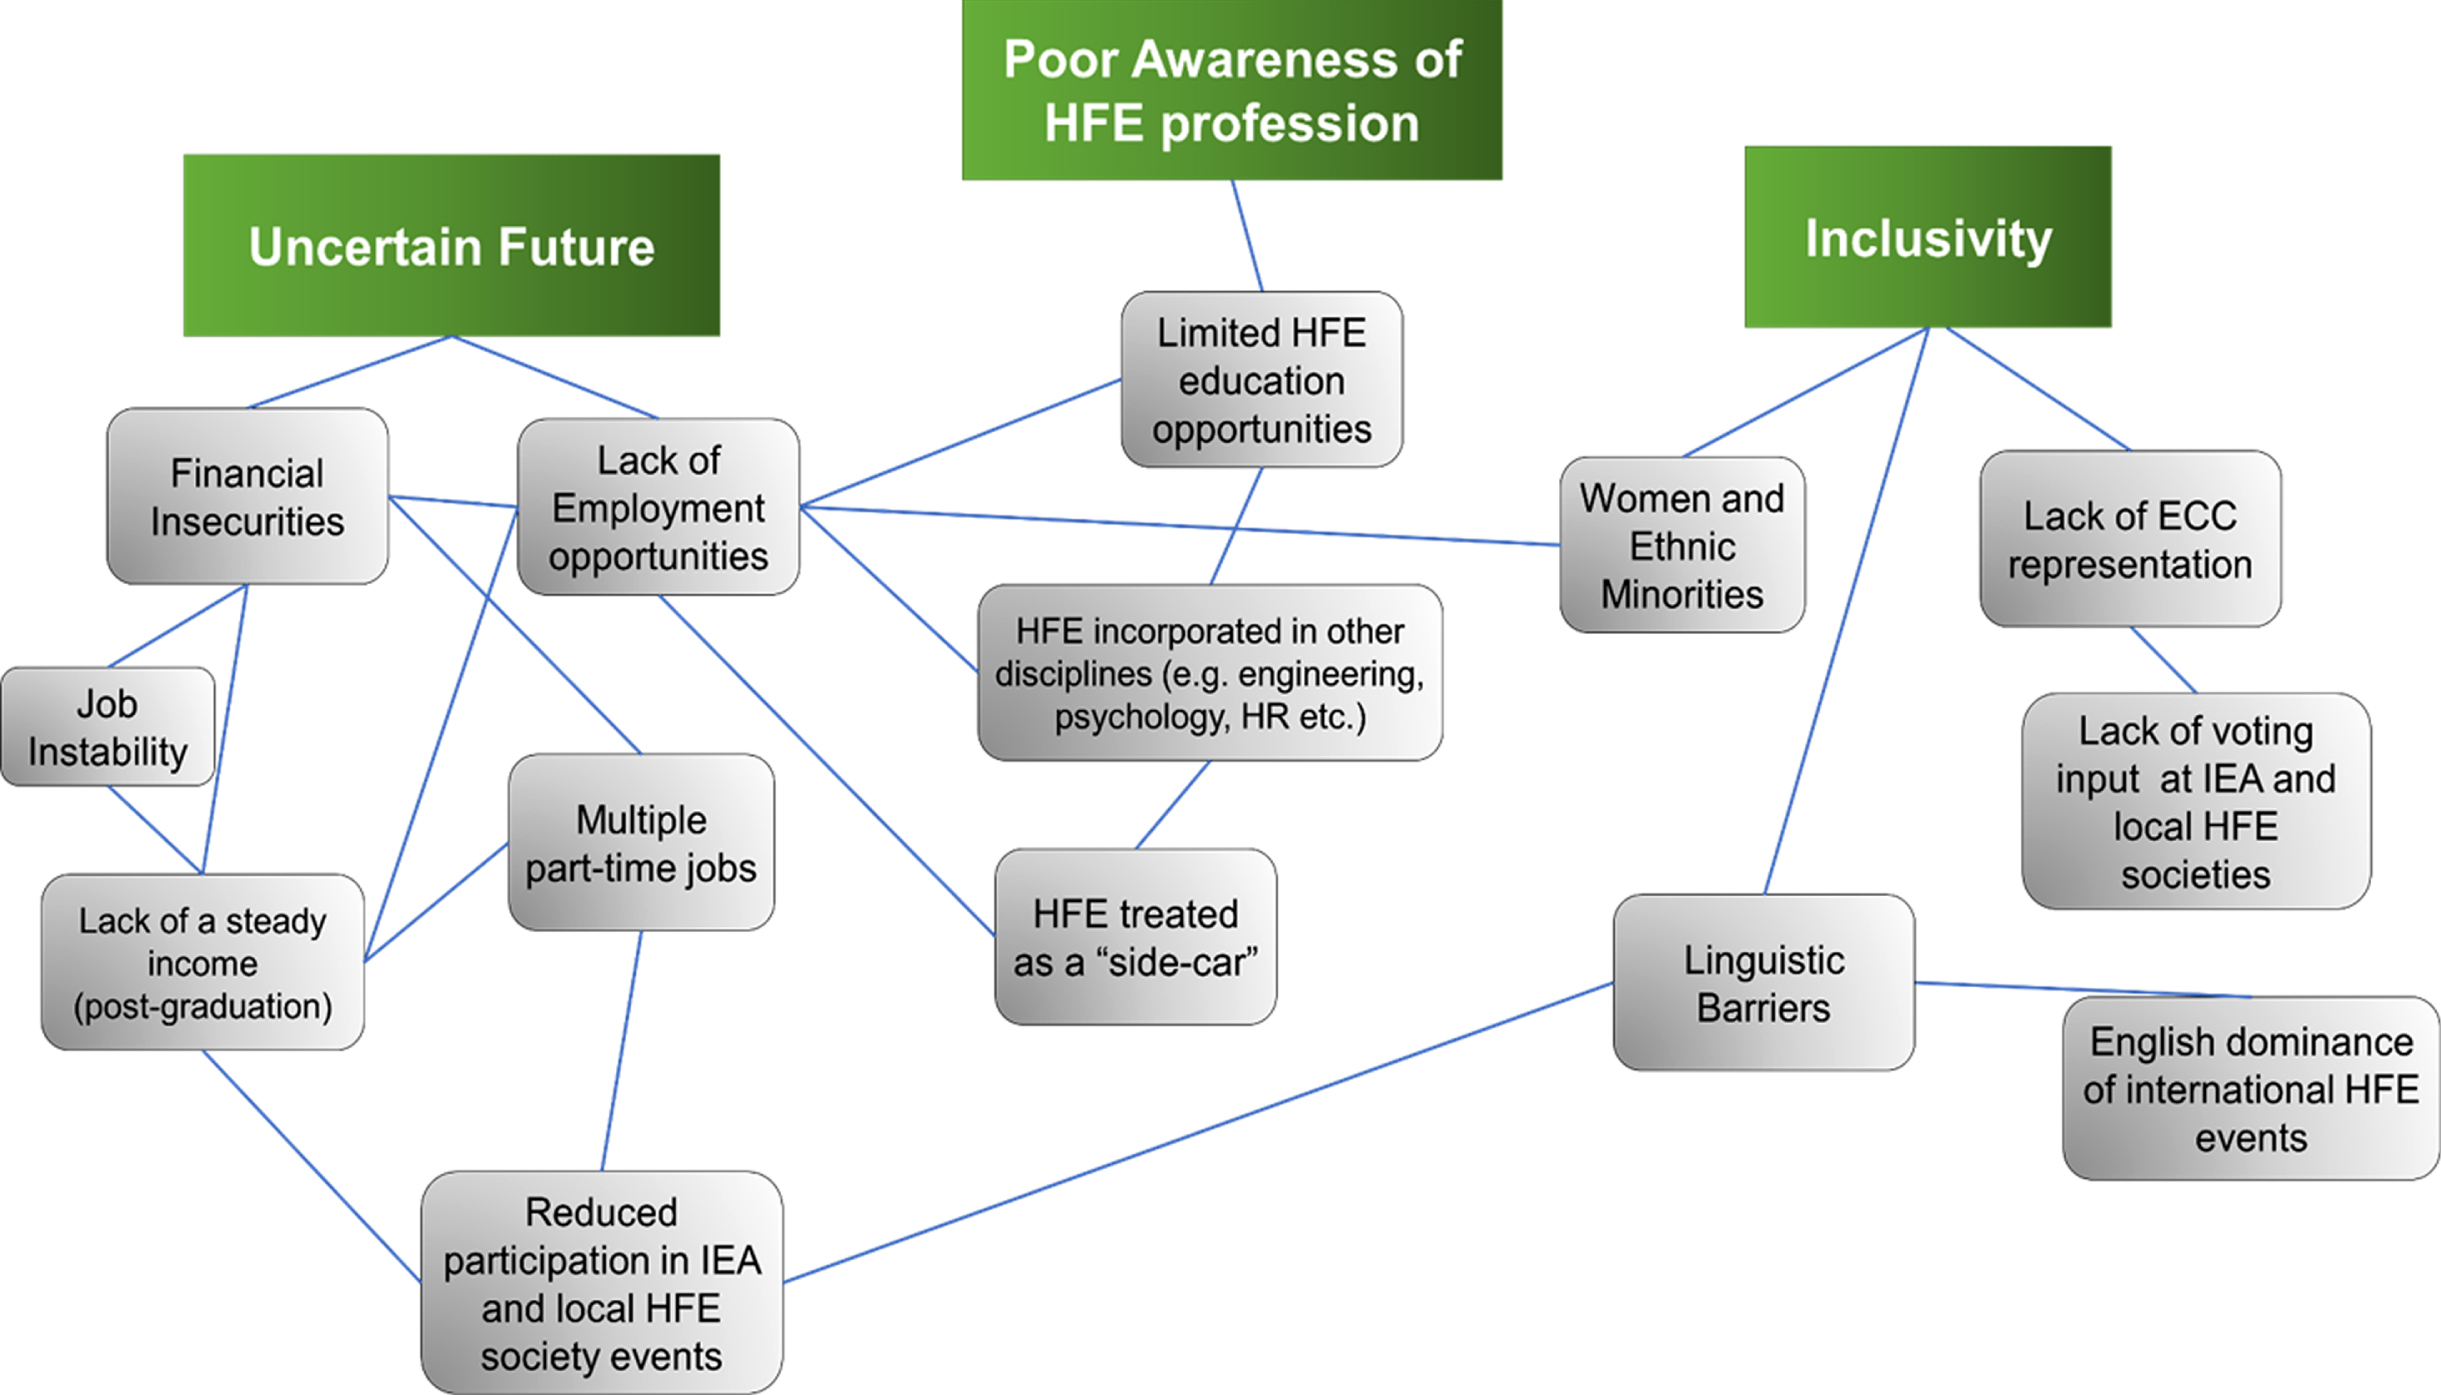 Illustrates the different themes and related subthemes (codes) of the barriers faced by ECC members in the world of HFE. Three emergent themes include: ‘uncertain future’ for the ECC, the challenges emanating from ‘poor awareness of the HFE profession’ and challenges around ‘inclusivity’.